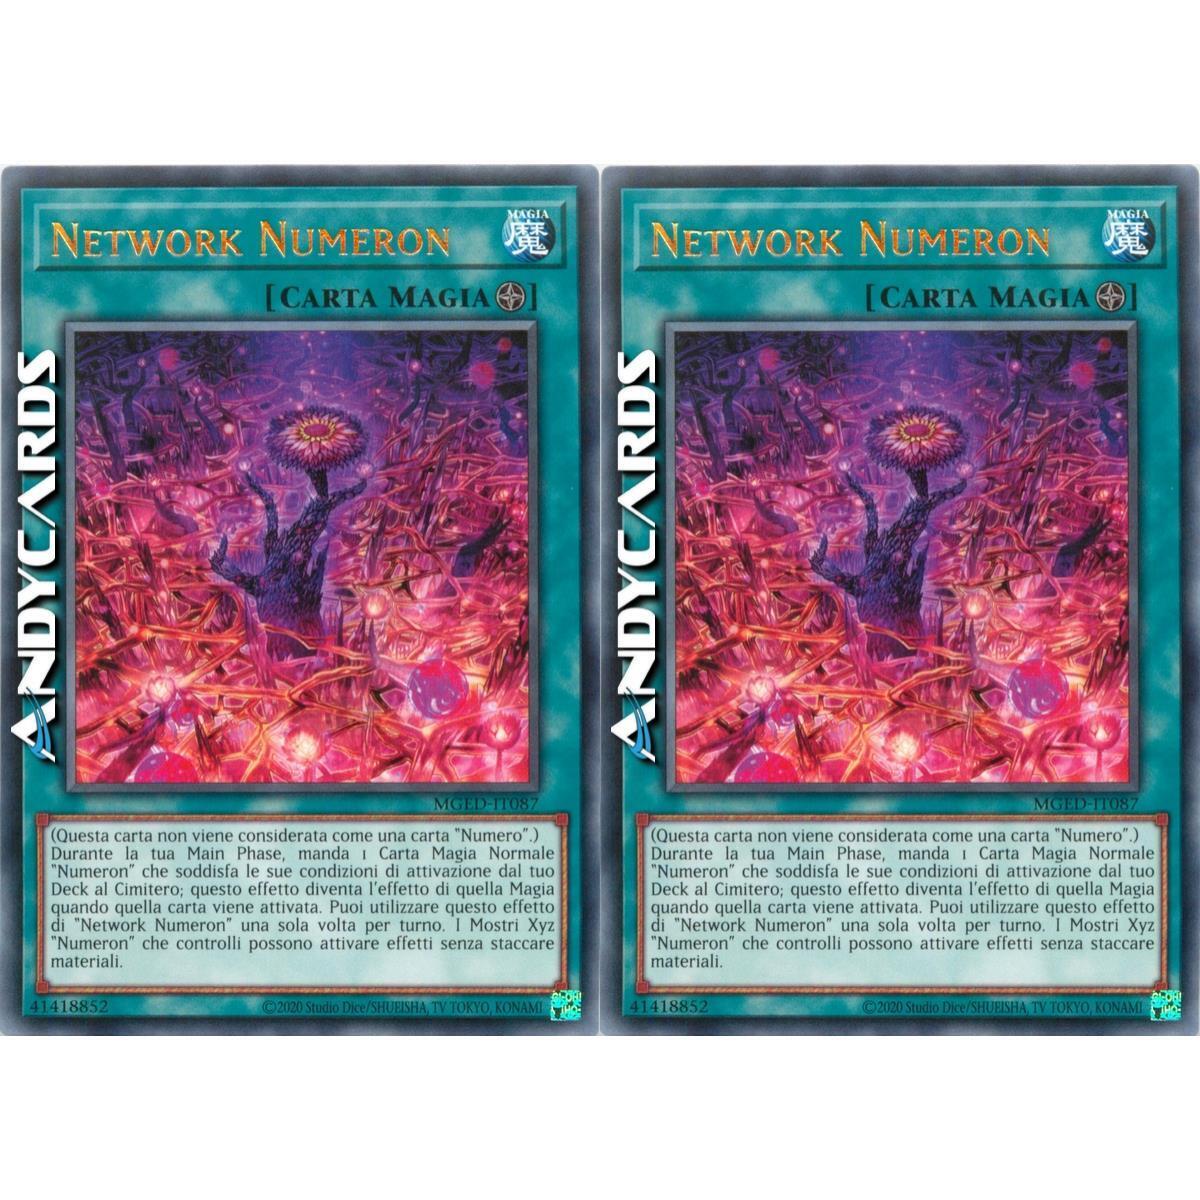 2x NETWORK NUMBERON • (Network Number) • Rare Gold • MGED IT087 • Unl • YUGIOH